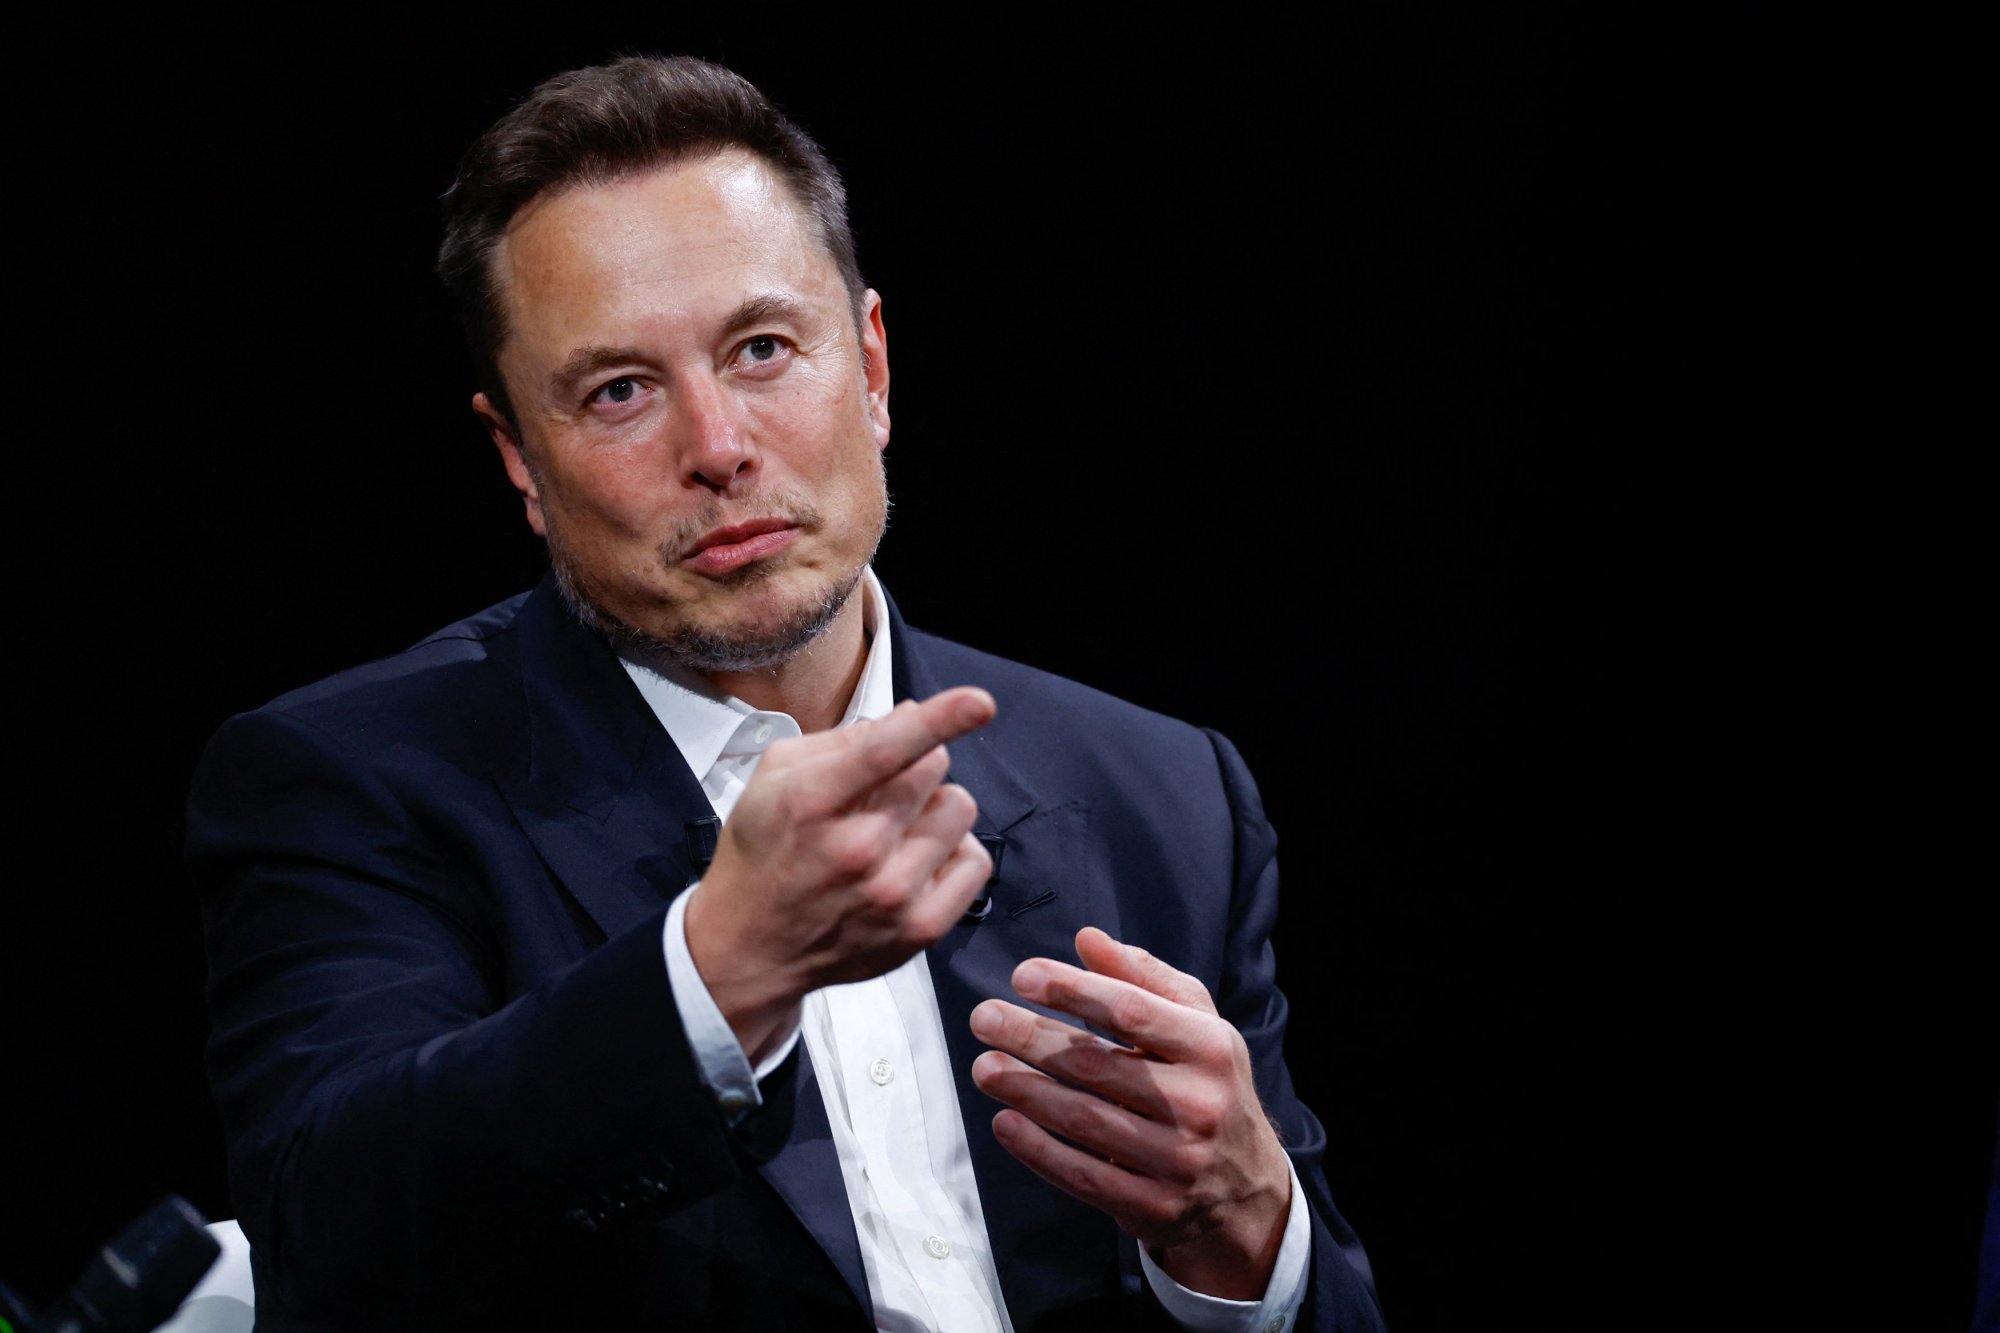 Elon Musk offers Wikipedia $1 billion to change its name – his “outrageous” proposal.